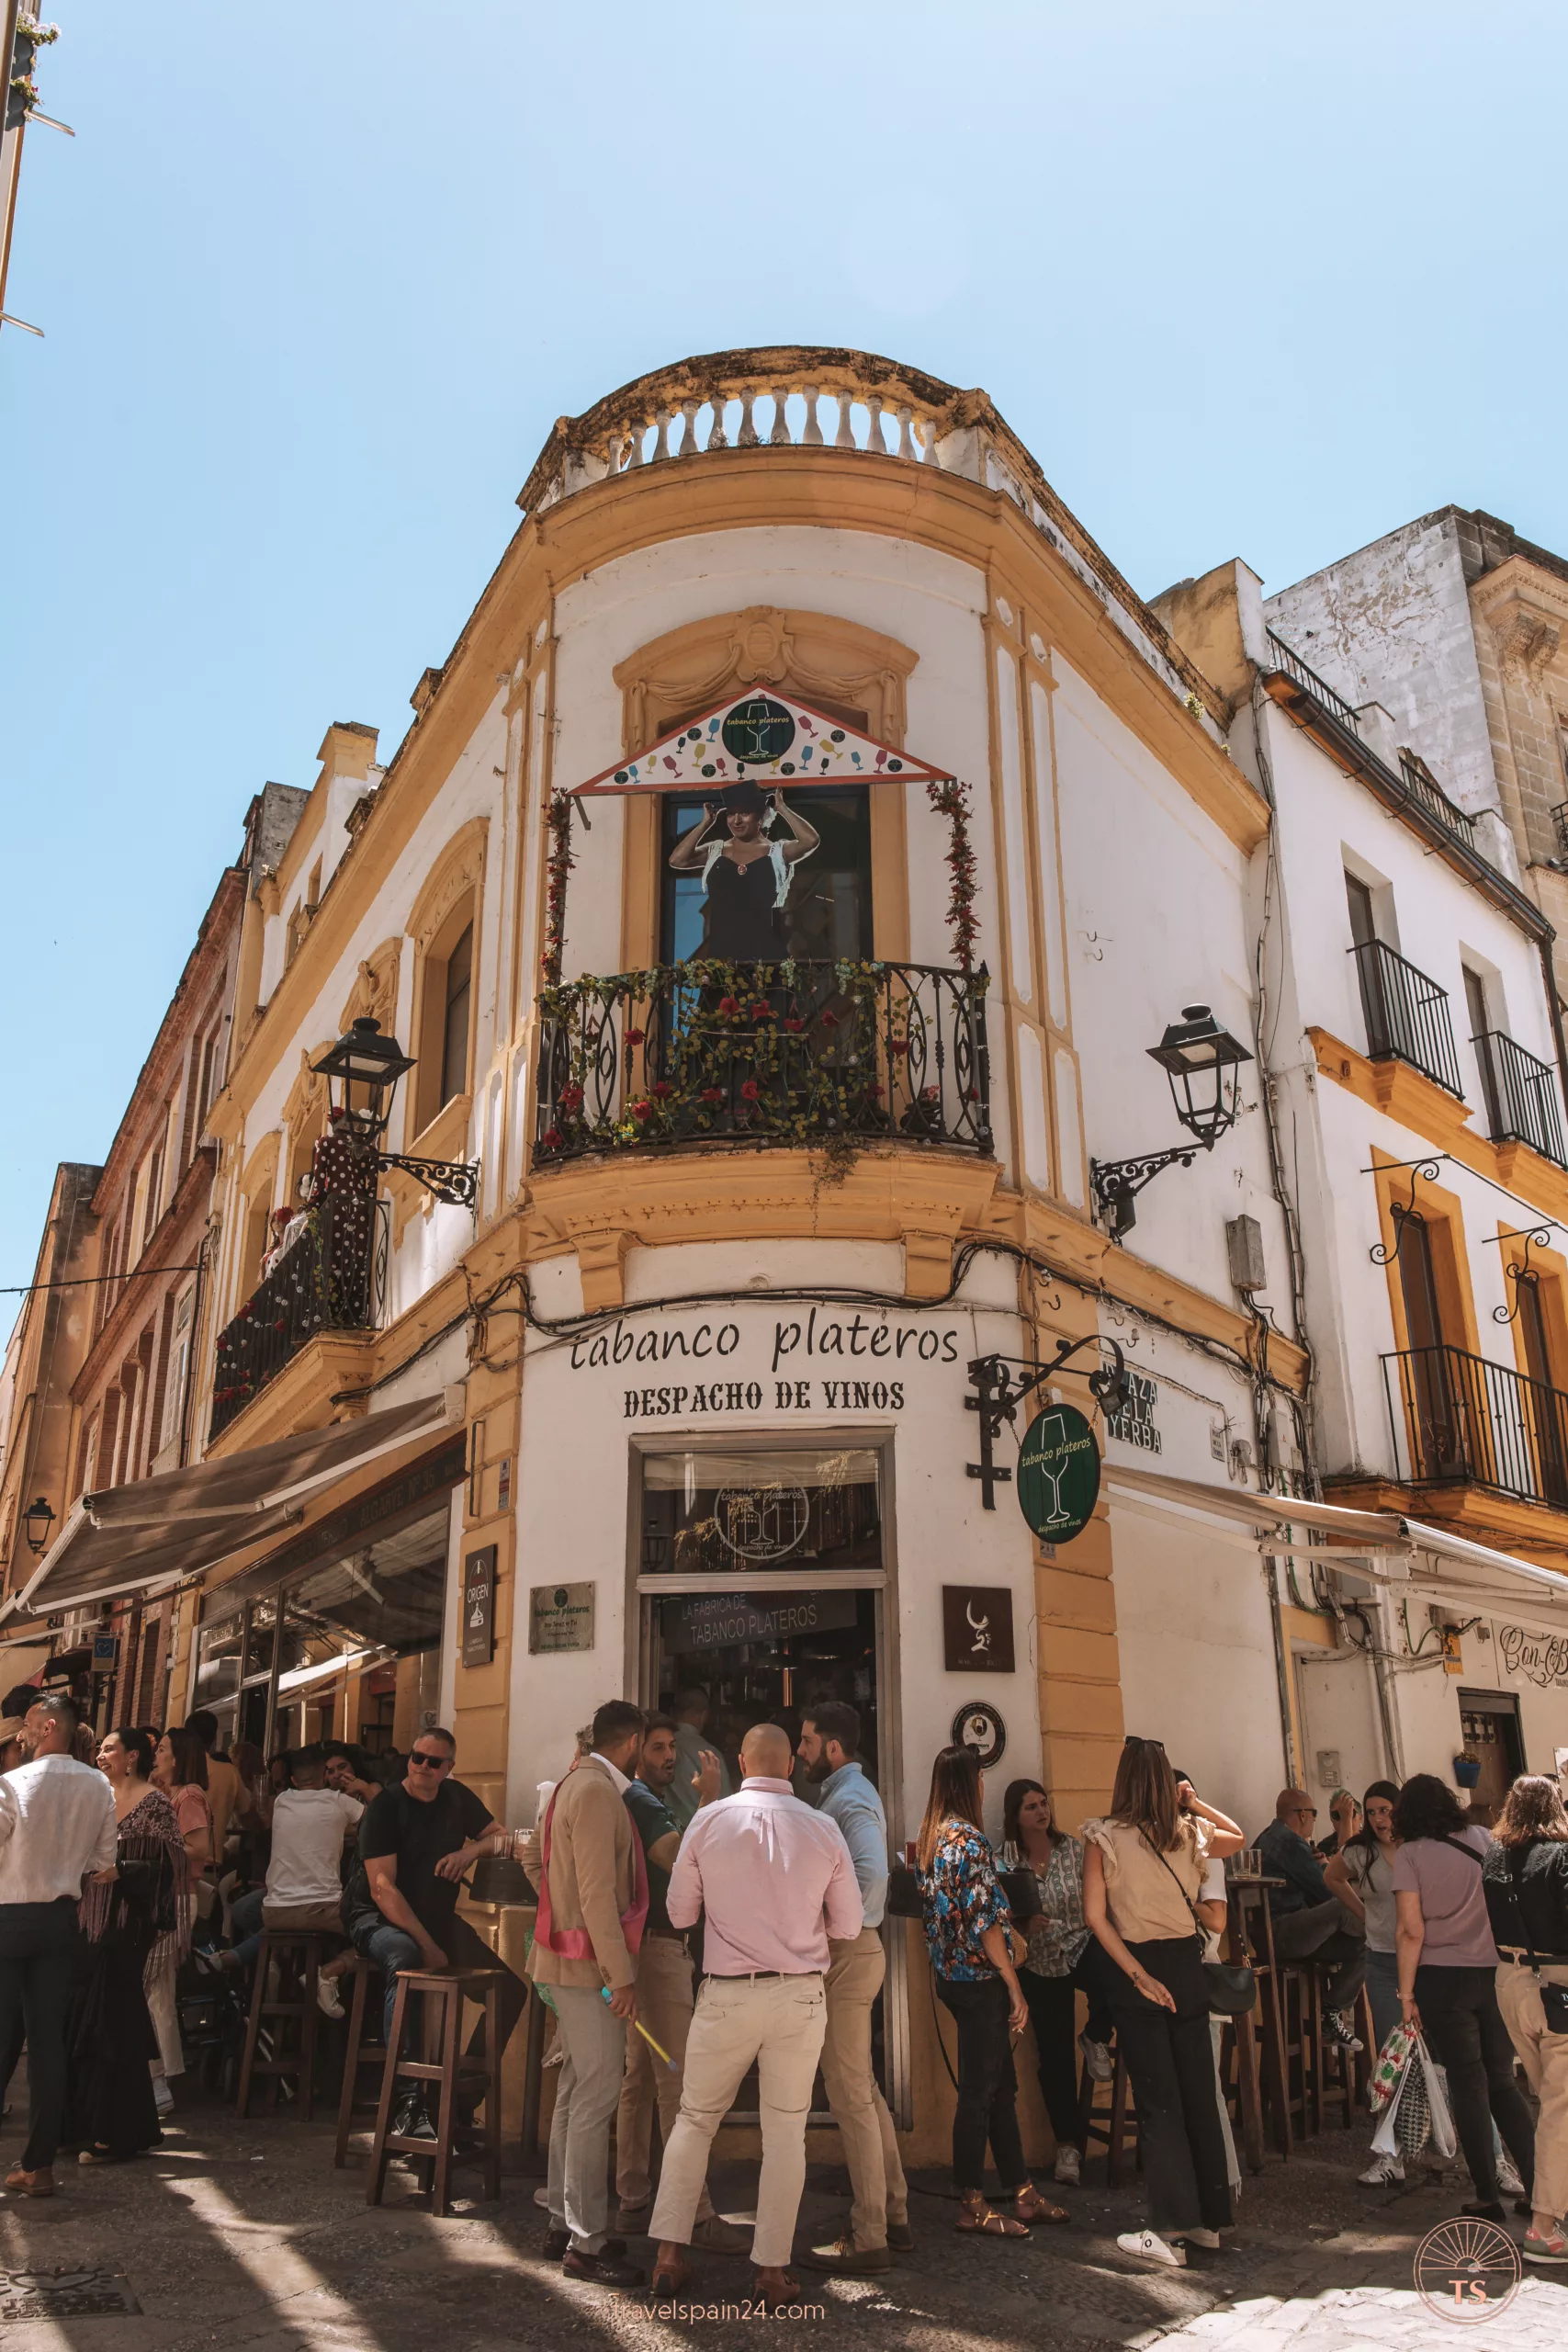 Entrance to Tabanco Plateros in Jerez de la Frontera, with people enjoying tapas and drinks outside. This image relates to the post by highlighting a popular spot for local cuisine in Jerez de la Frontera.